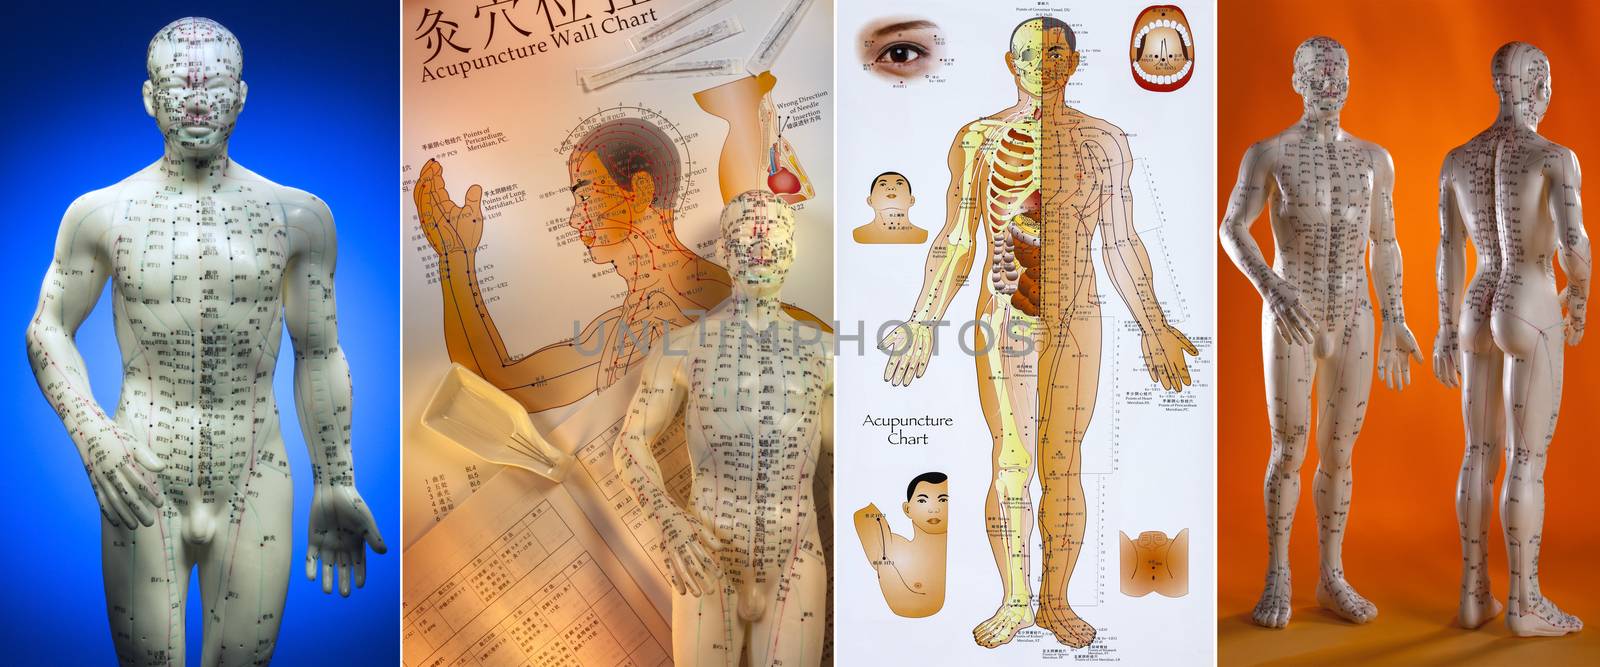 Acupuncture is a system of complementary medicine that involves pricking the skin or tissues with needles, used to alleviate pain and to treat various physical, mental, and emotional conditions. Originating in ancient China, acupuncture is now widely practiced in the West.